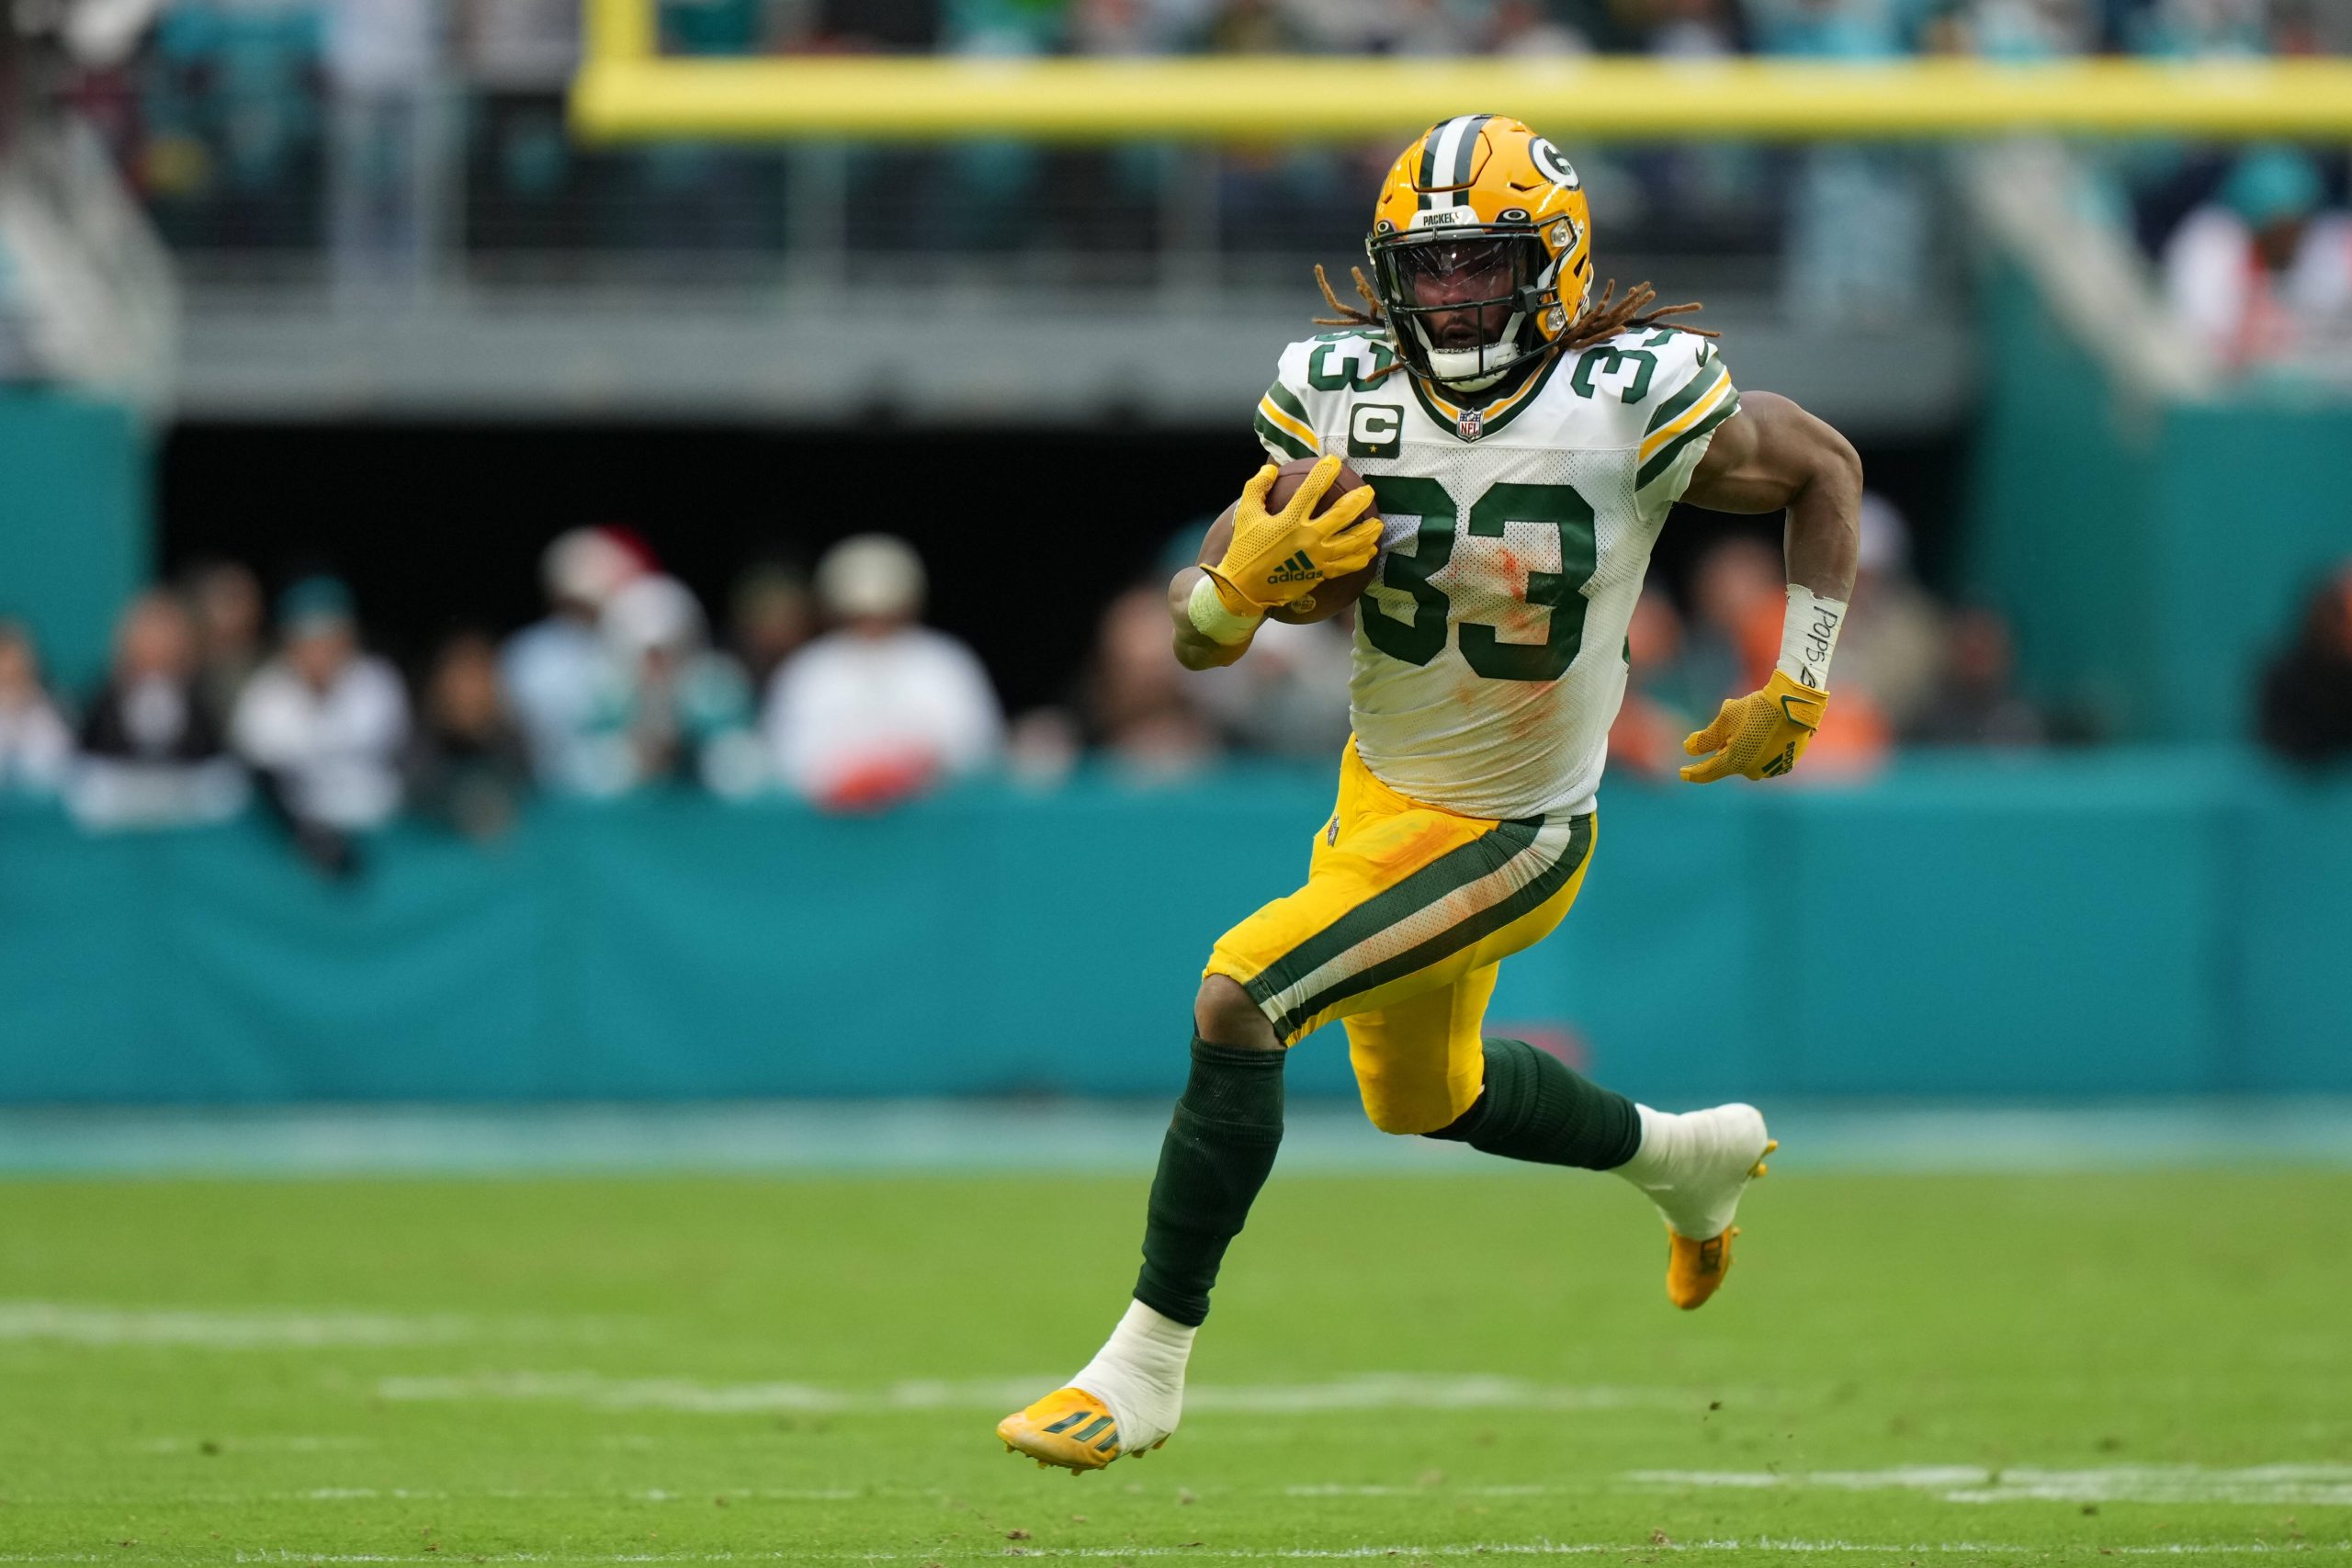 MIAMI GARDENS, FL - DECEMBER 25: Green Bay Packers running back Aaron Jones 33 runs for a first down in the second half during the game between the Green Bay Packers and the Miami Dolphins on Sunday, December 25, 2022 at Hard Rock Stadium, Miami Gardens, Fla. Photo by Peter Joneleit/Icon Sportswire NFL, American Football Herren, USA DEC 25 Packers at Dolphins Icon221225046